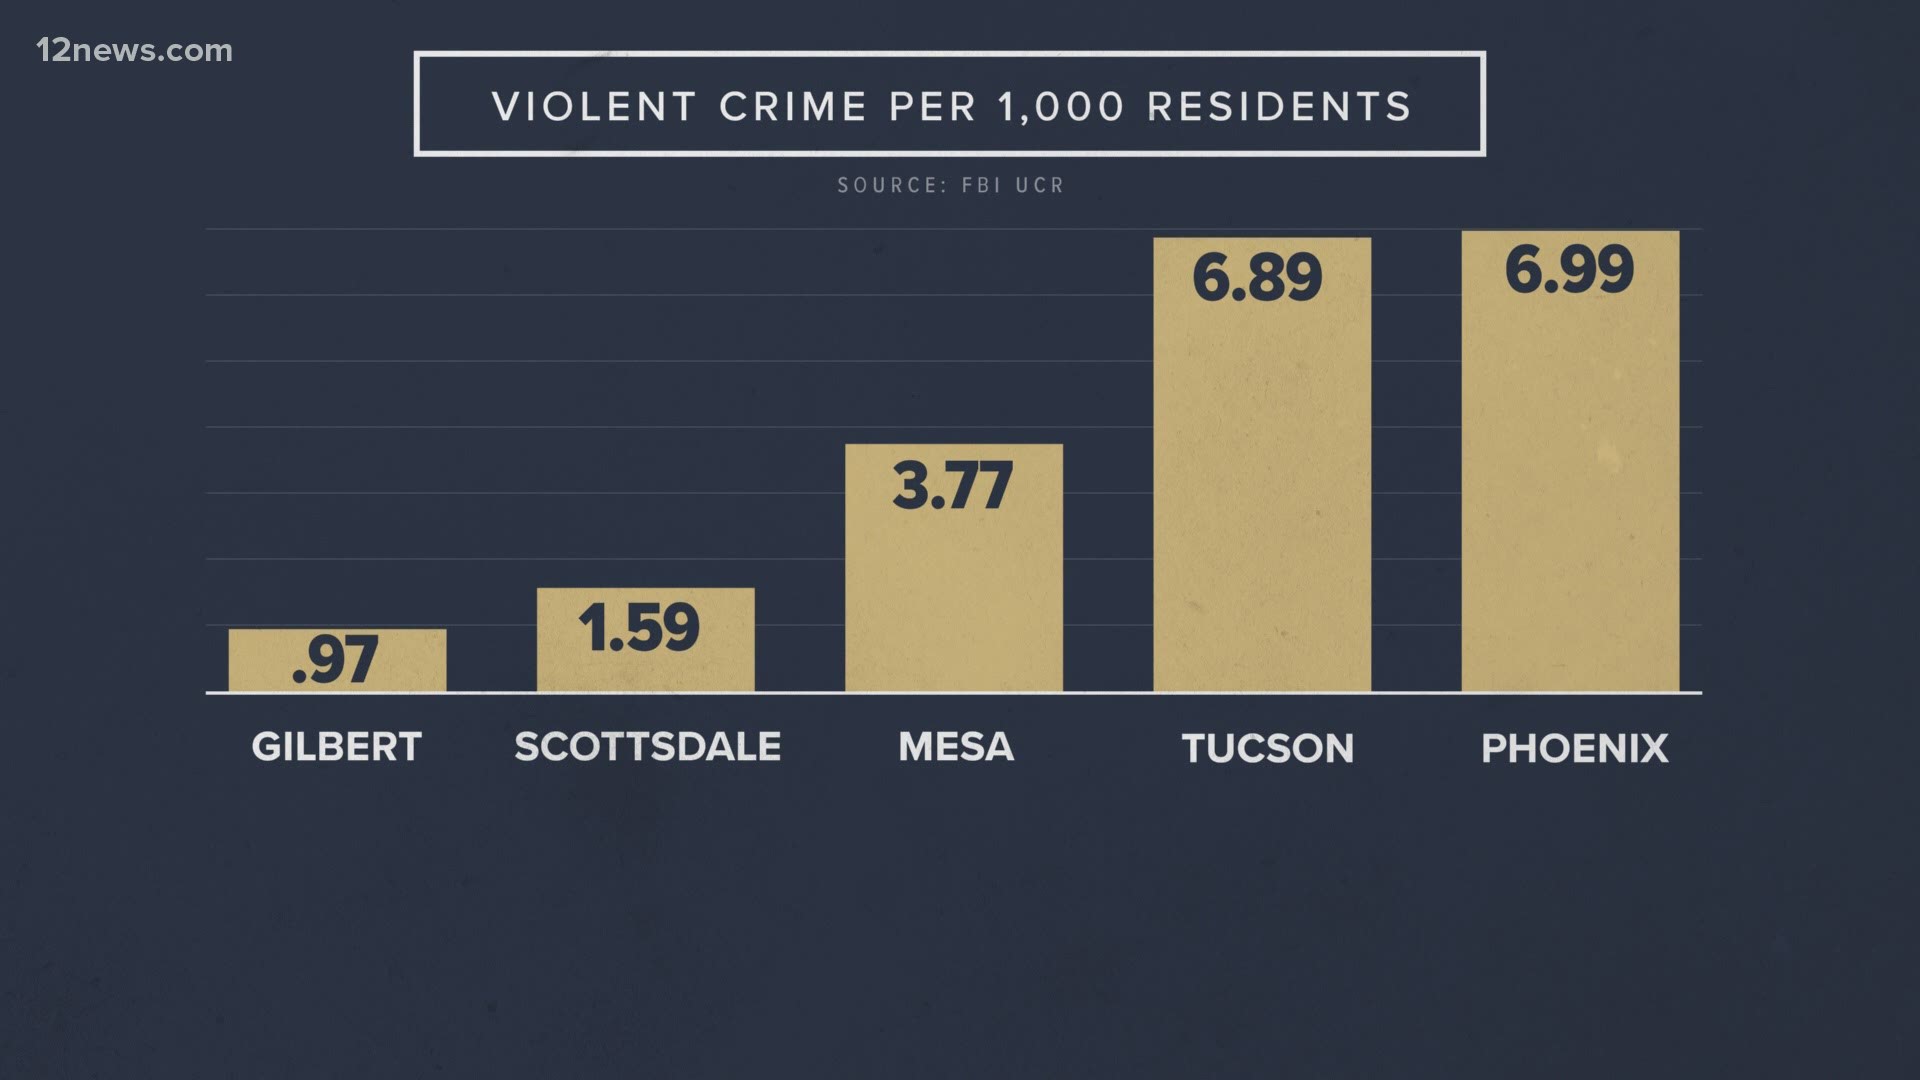 Data collected in 2019 shows that Gilbert has the lowest violent crime rate and Tucson and Phoenix have the highest.